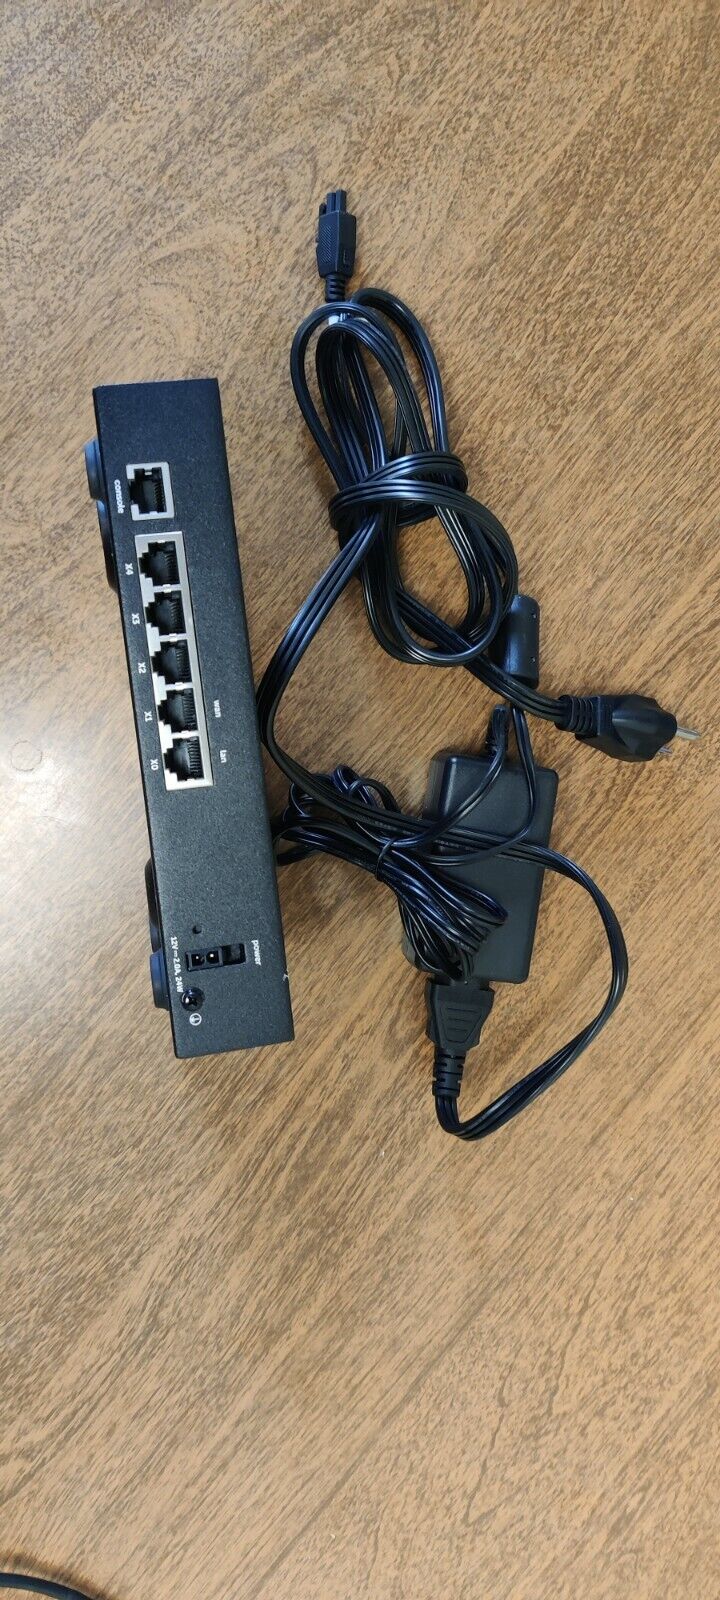 Sonicwall TZ300 Firewall - Used - Fully Functional